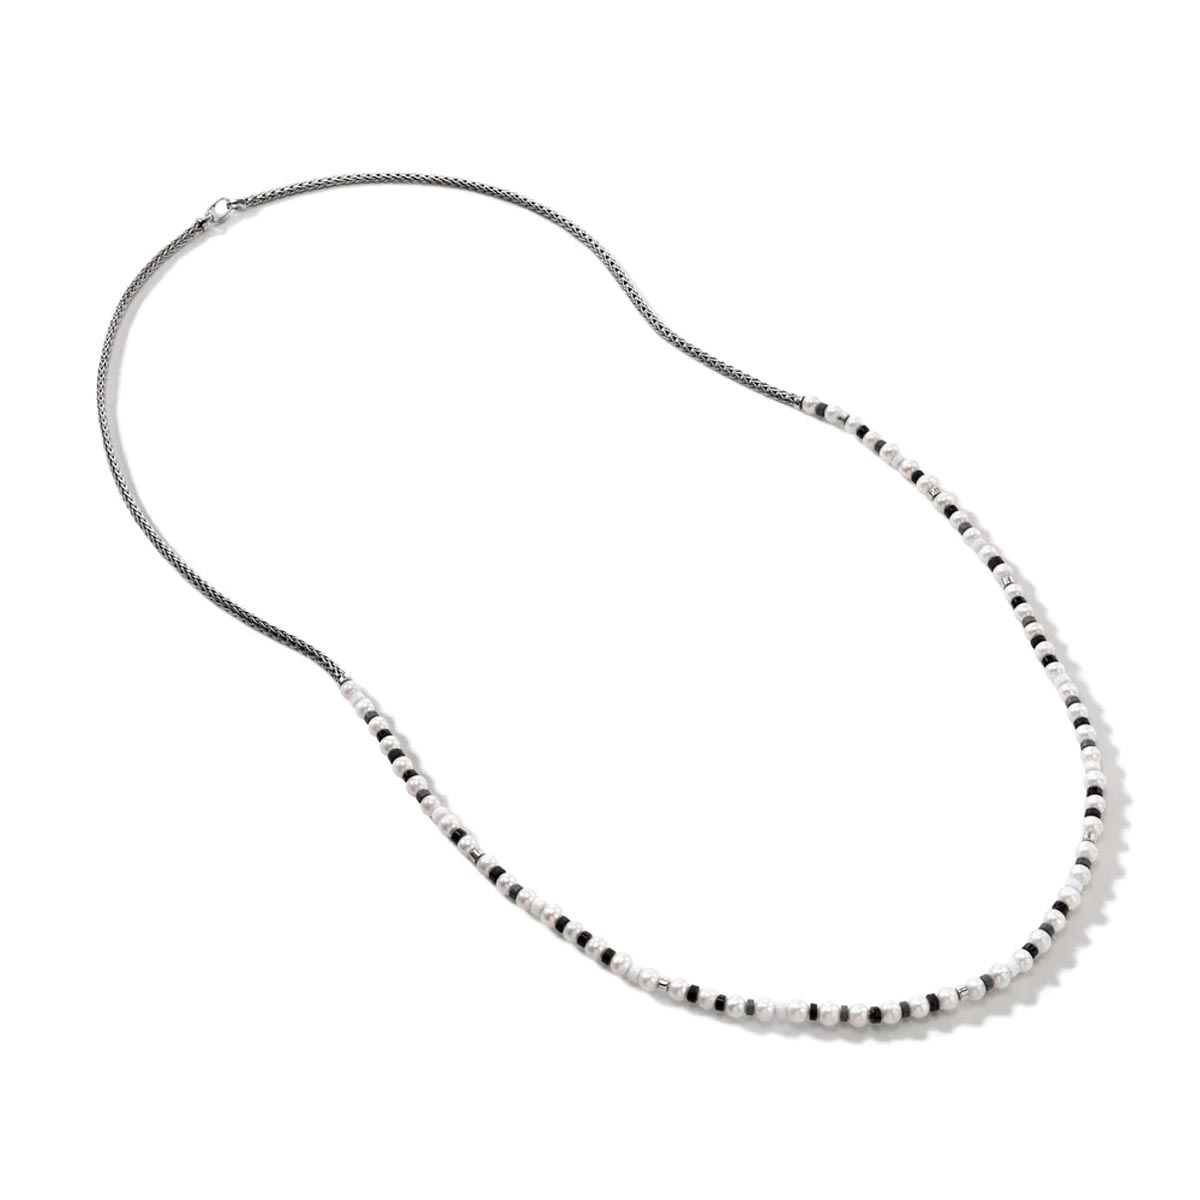 John Hardy Colorblock Collection Cultured Freshwater Pearl Black Onyx and Hematite Bead Necklace in Sterling Silver with White Enamel (5.5-6mm pearls)